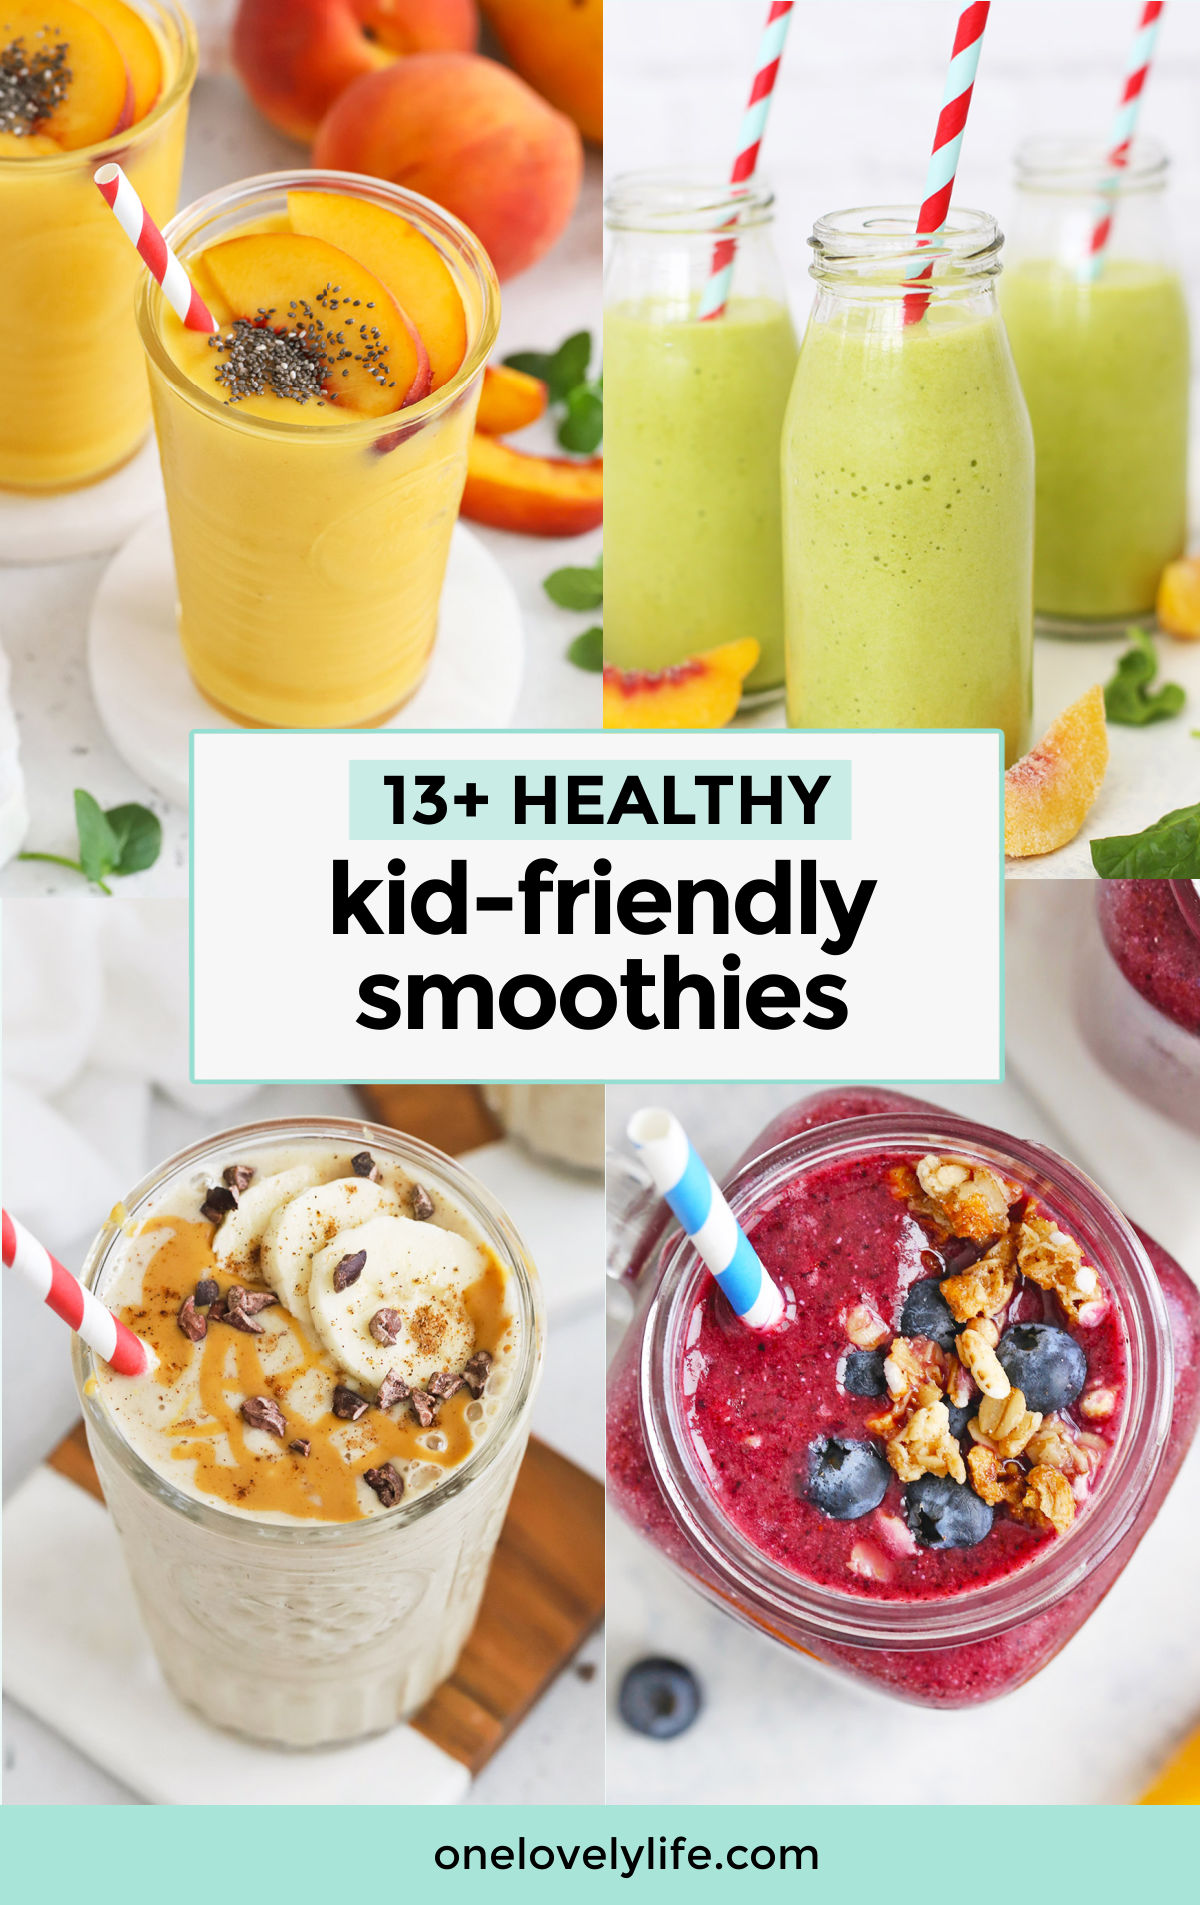 4 flavors of kid friendly smoothie recipes